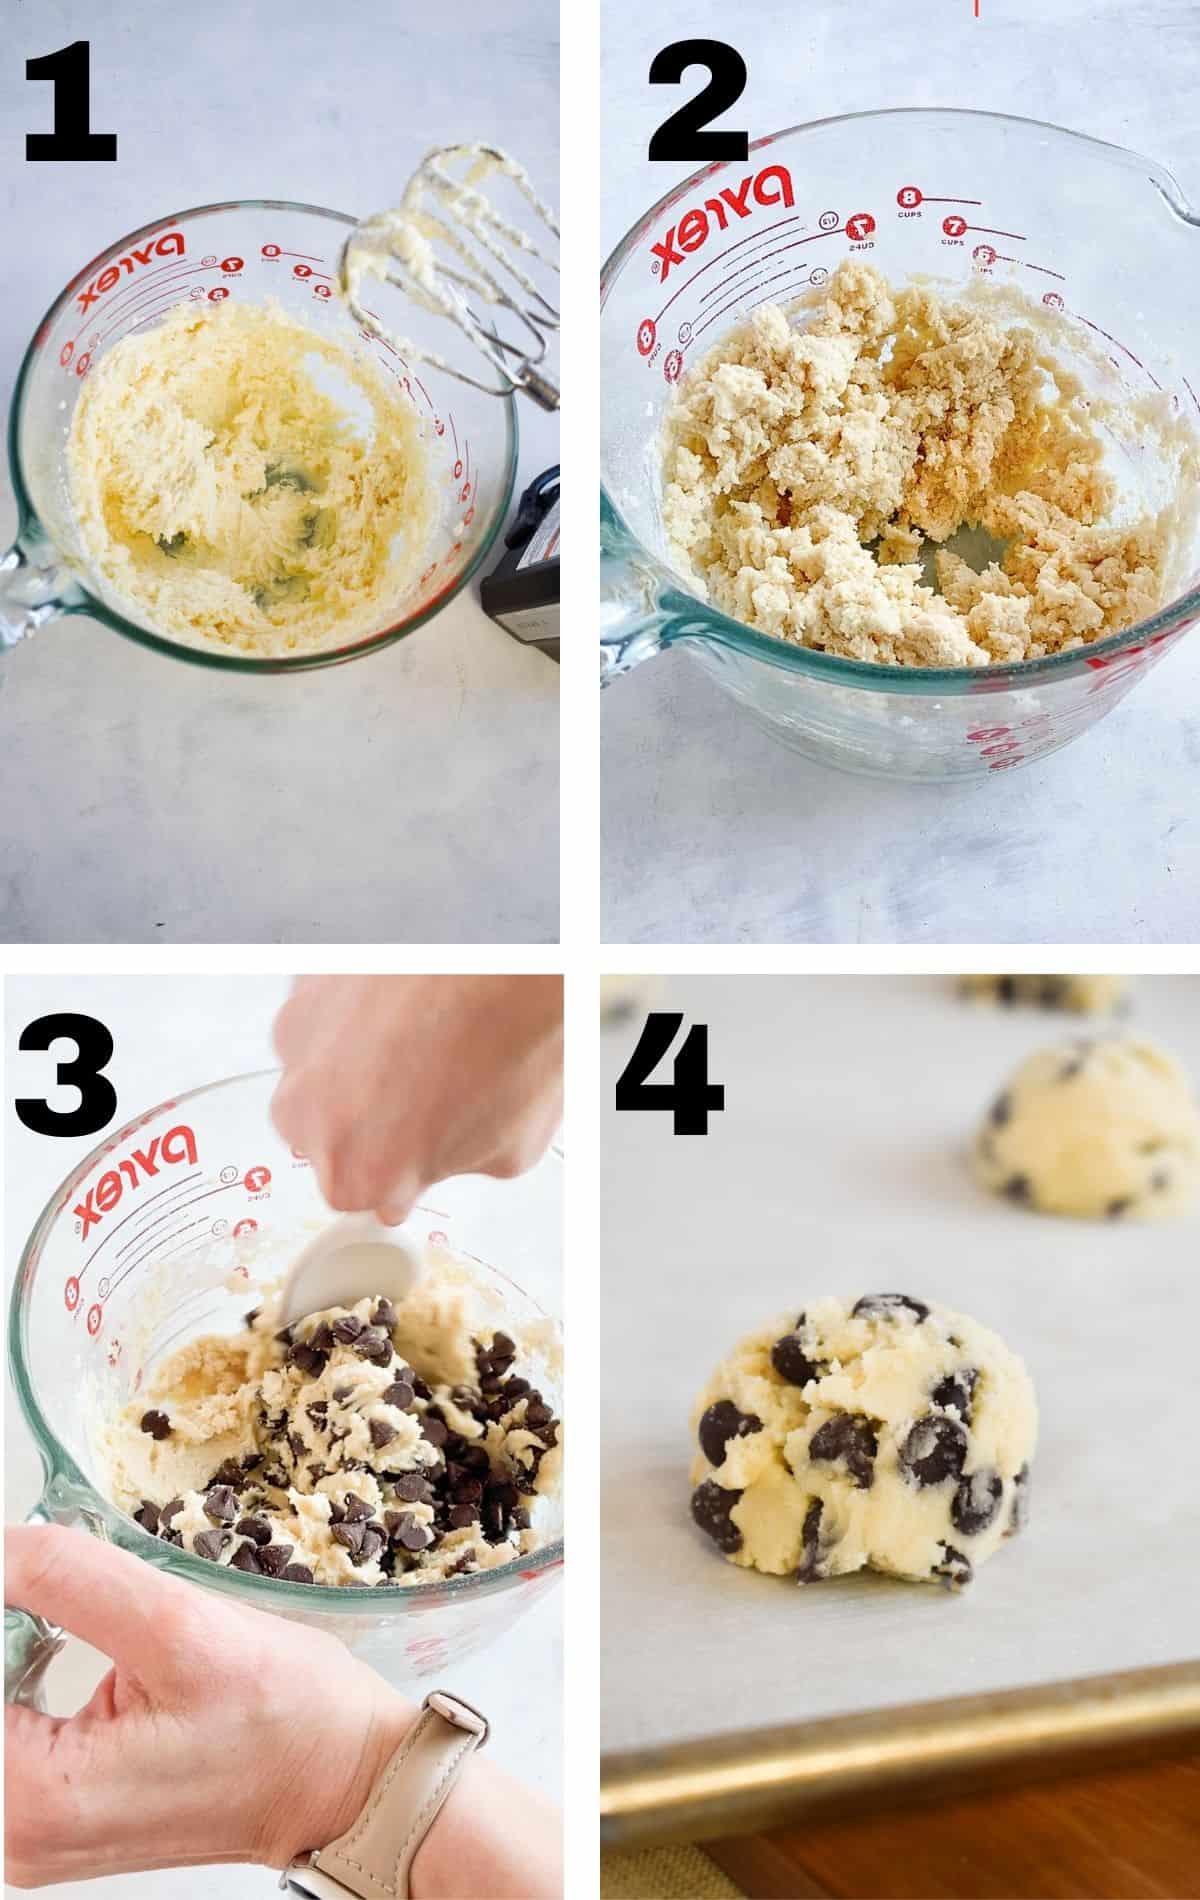 4 images showing how to make the recipe. 